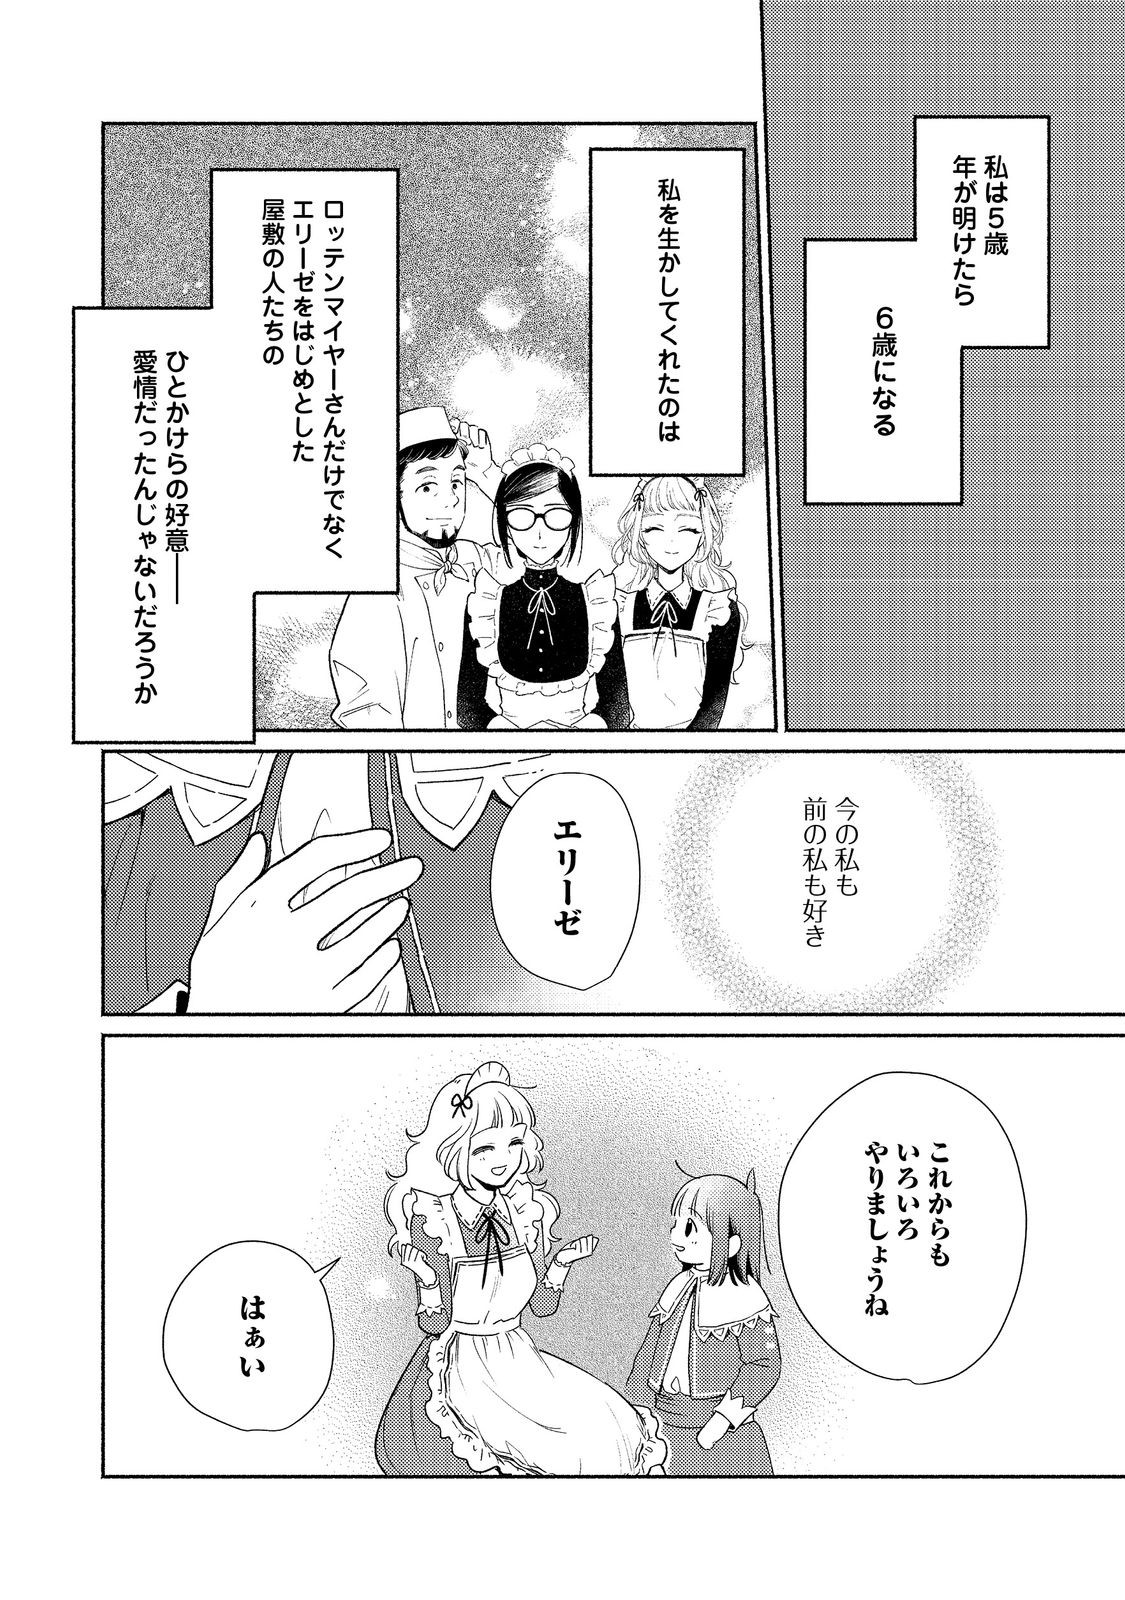 I’m the White Pig Nobleman 第21.2話 - Page 10